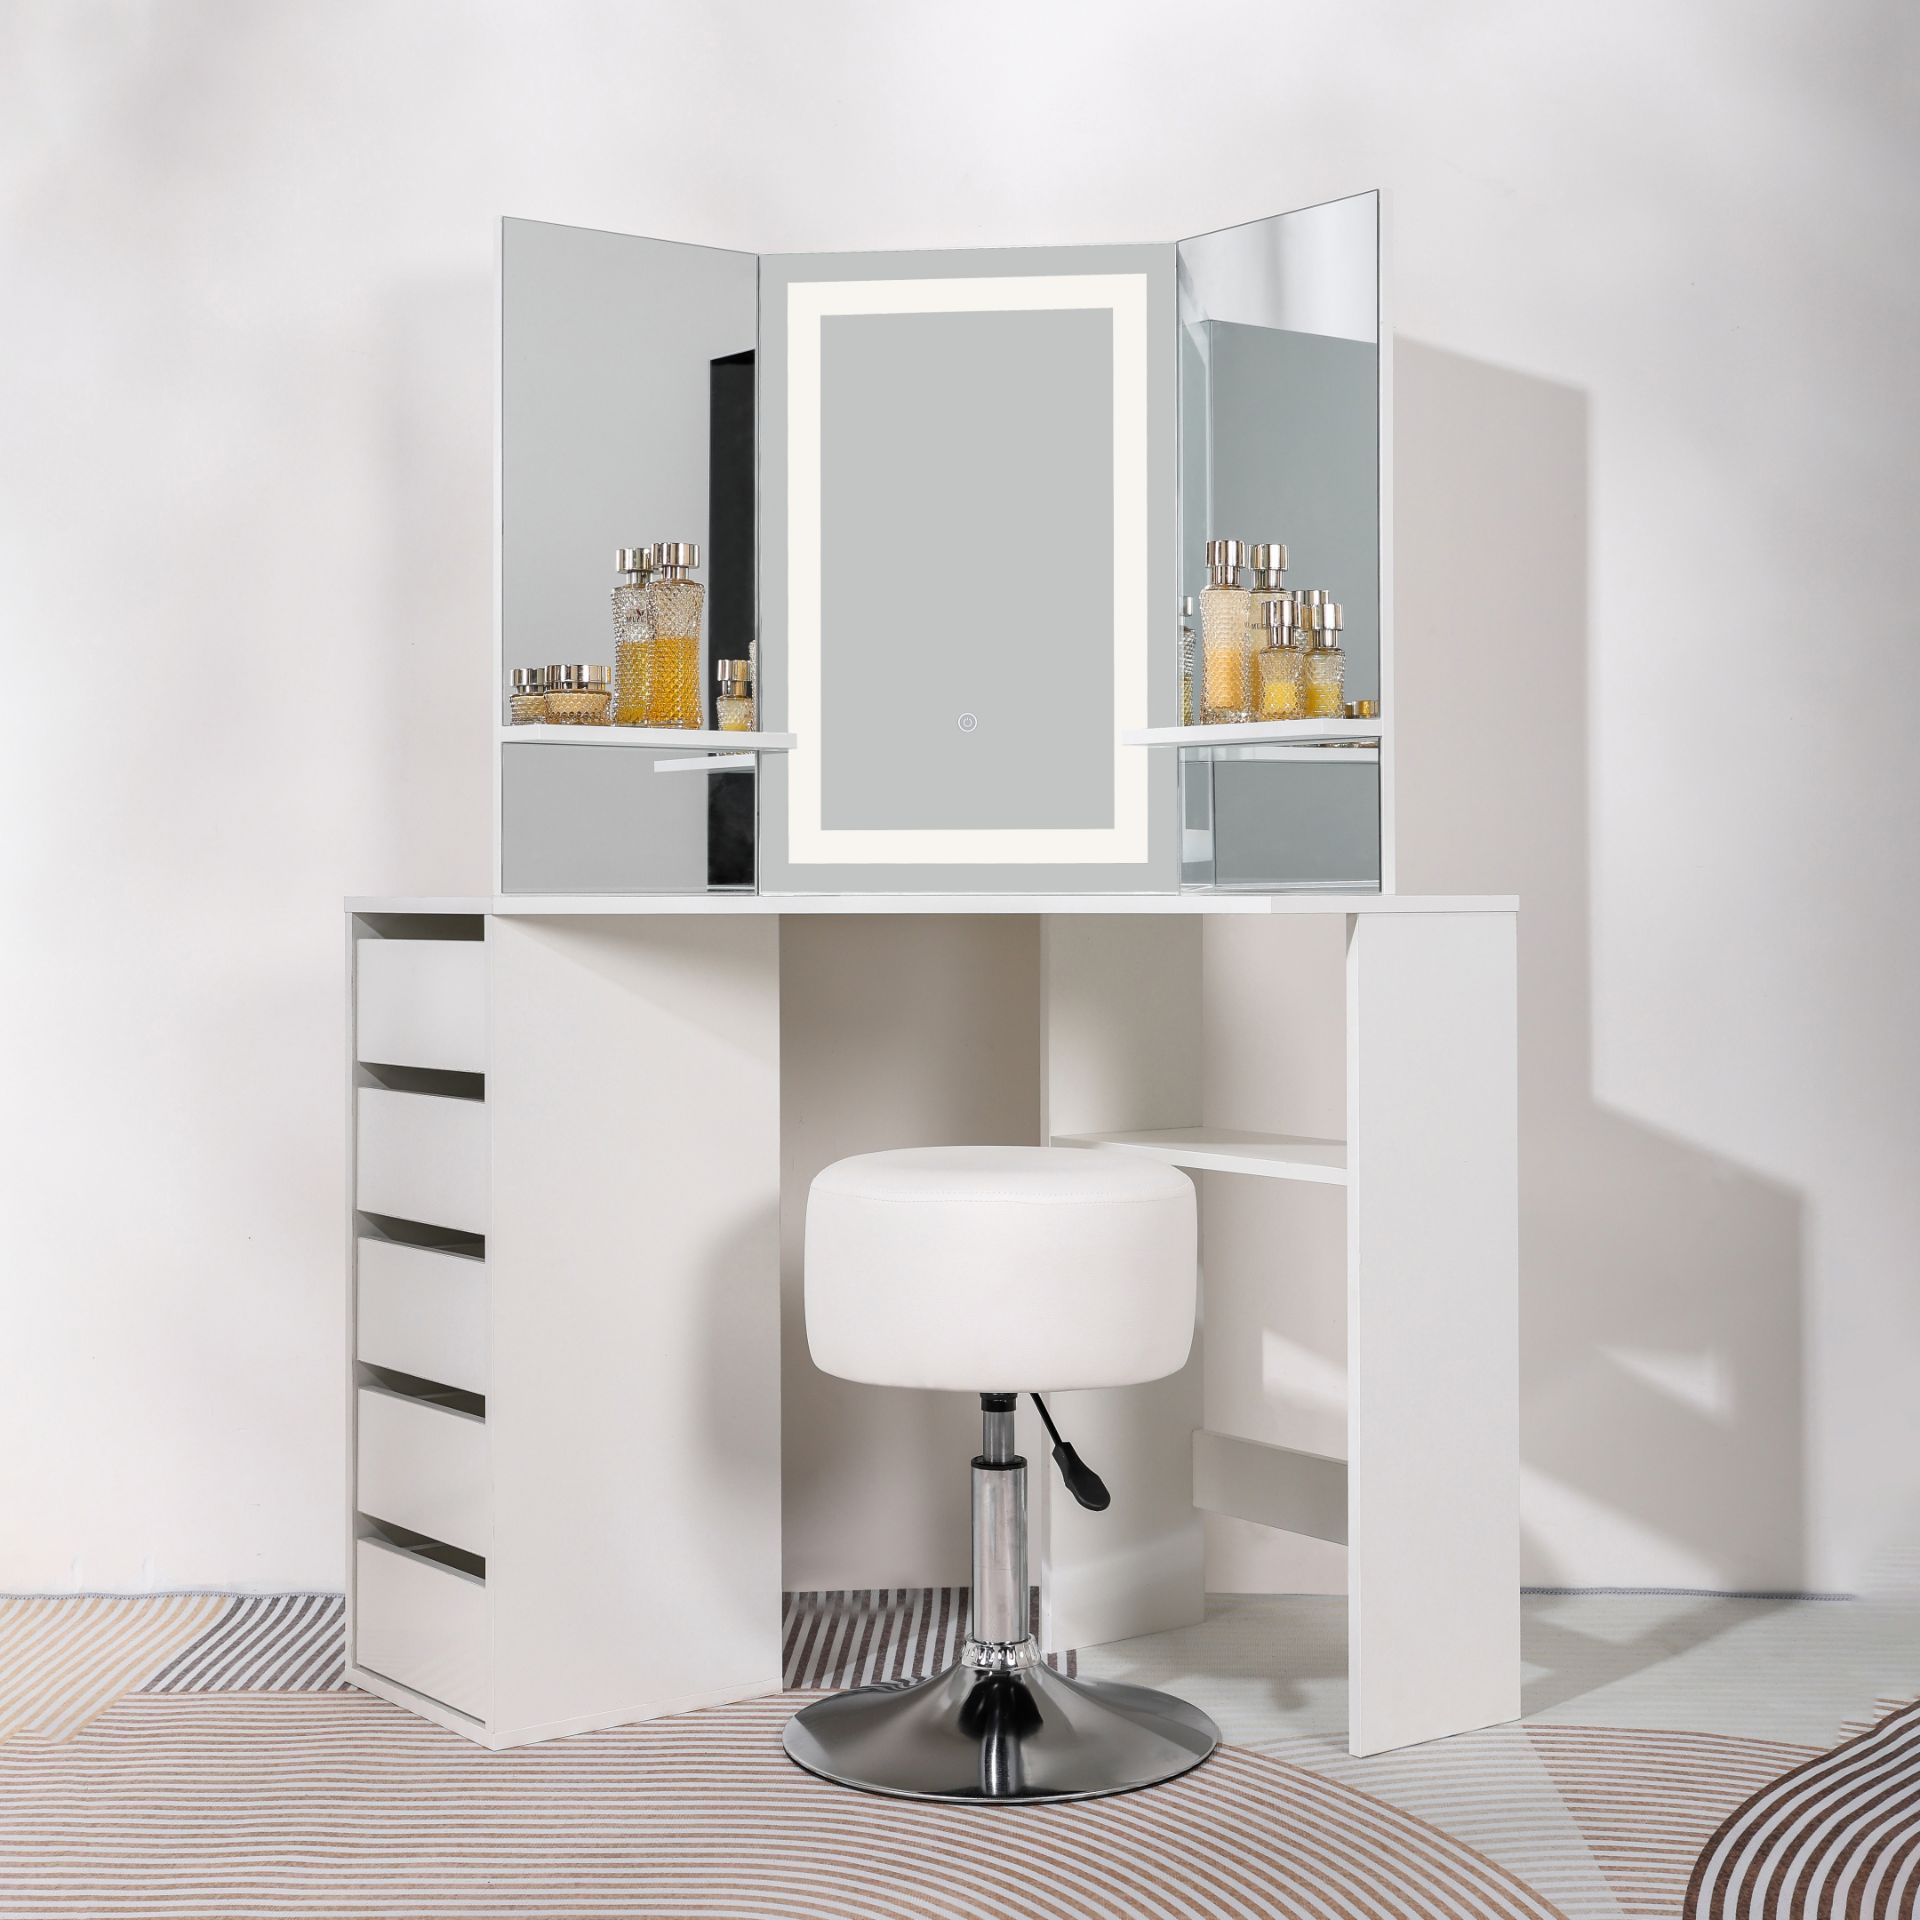 10 X BRAND NEW MAKE UP CORNER DRESSING TABLE 5 DRAWER WITH TOUCH LED MIRROR & STOOL RRP £3500 - Image 2 of 4